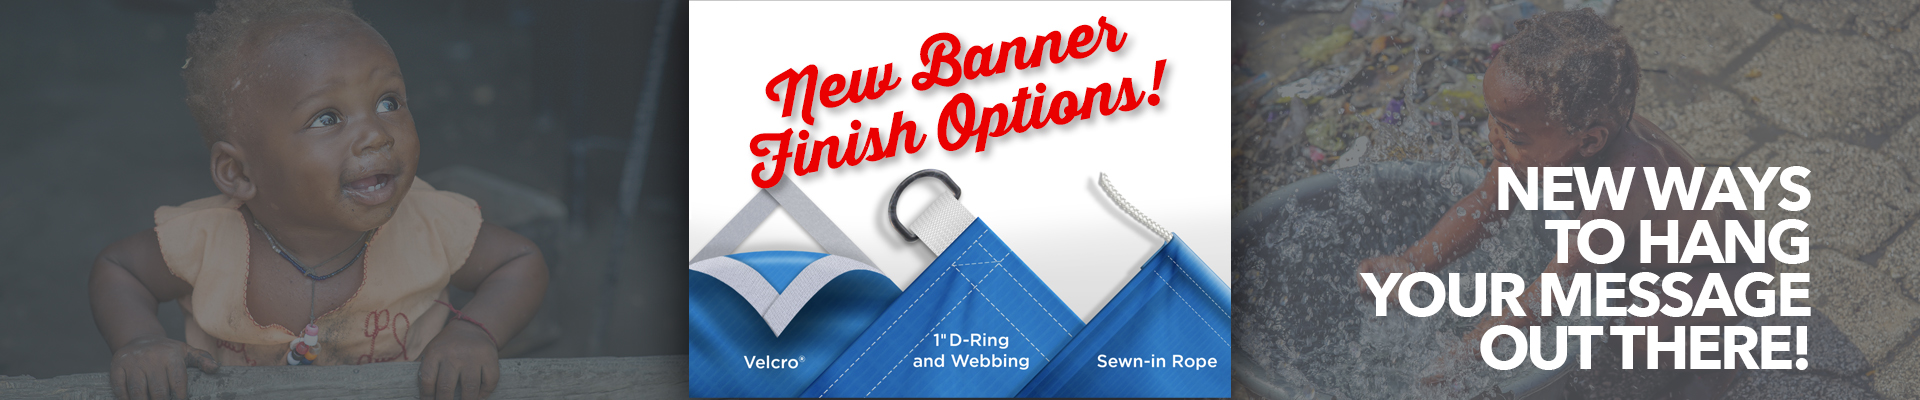 Hanging banner options